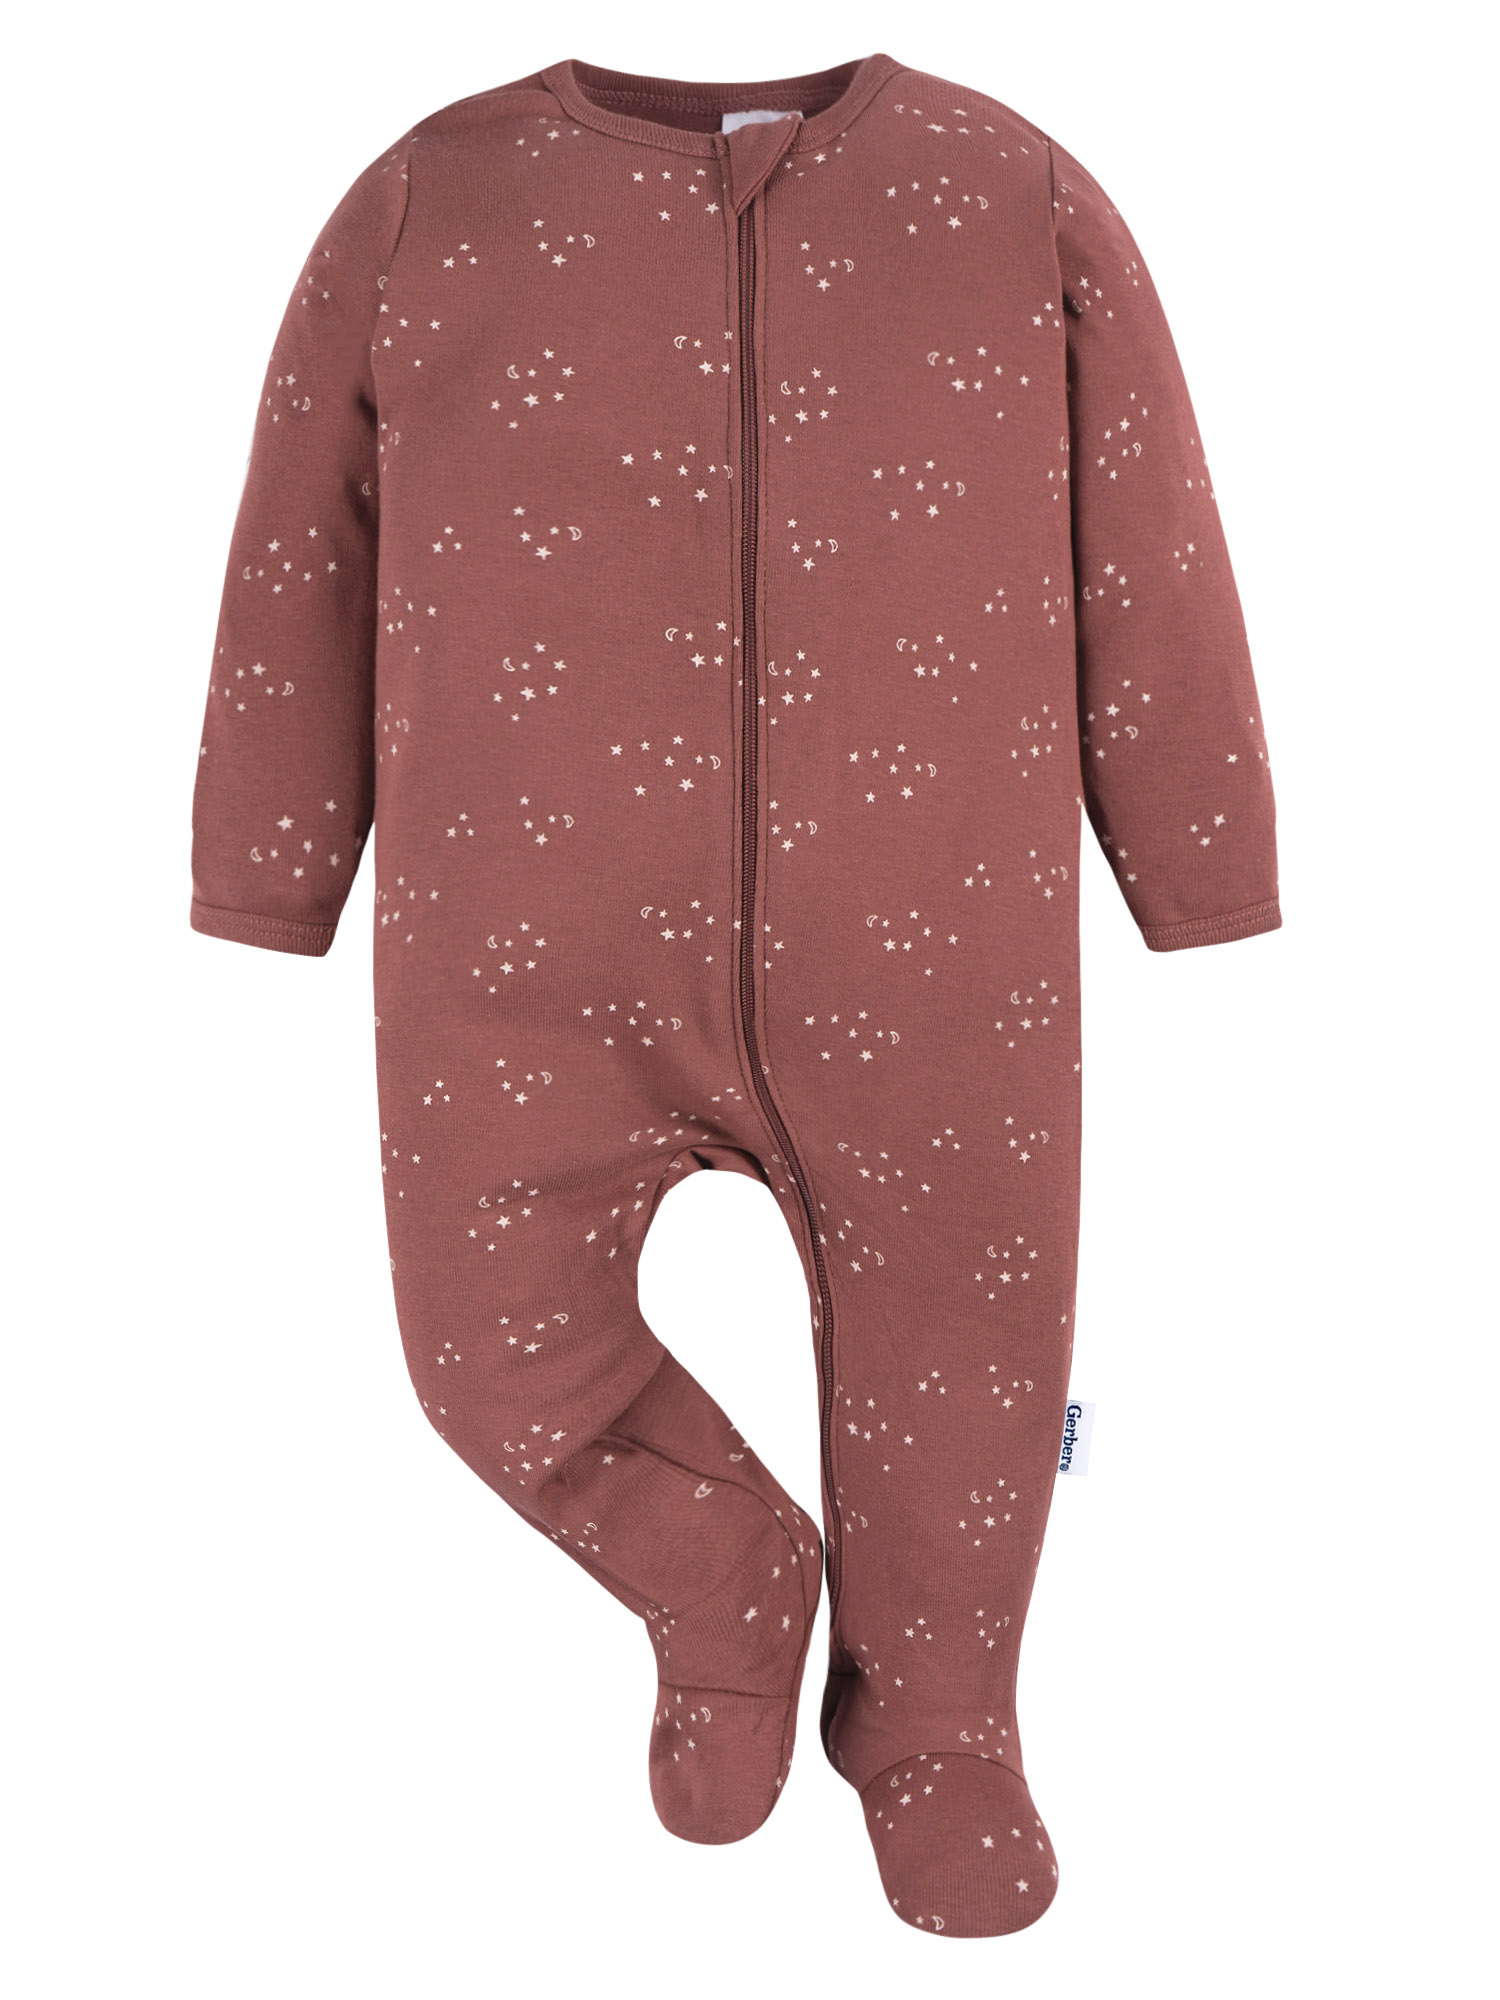 Gerber Baby Girl Sleep´N Play Footed Cotton Pajamas, 2-Pack, Sizes Newborn - 3/6 Months - image 3 of 12